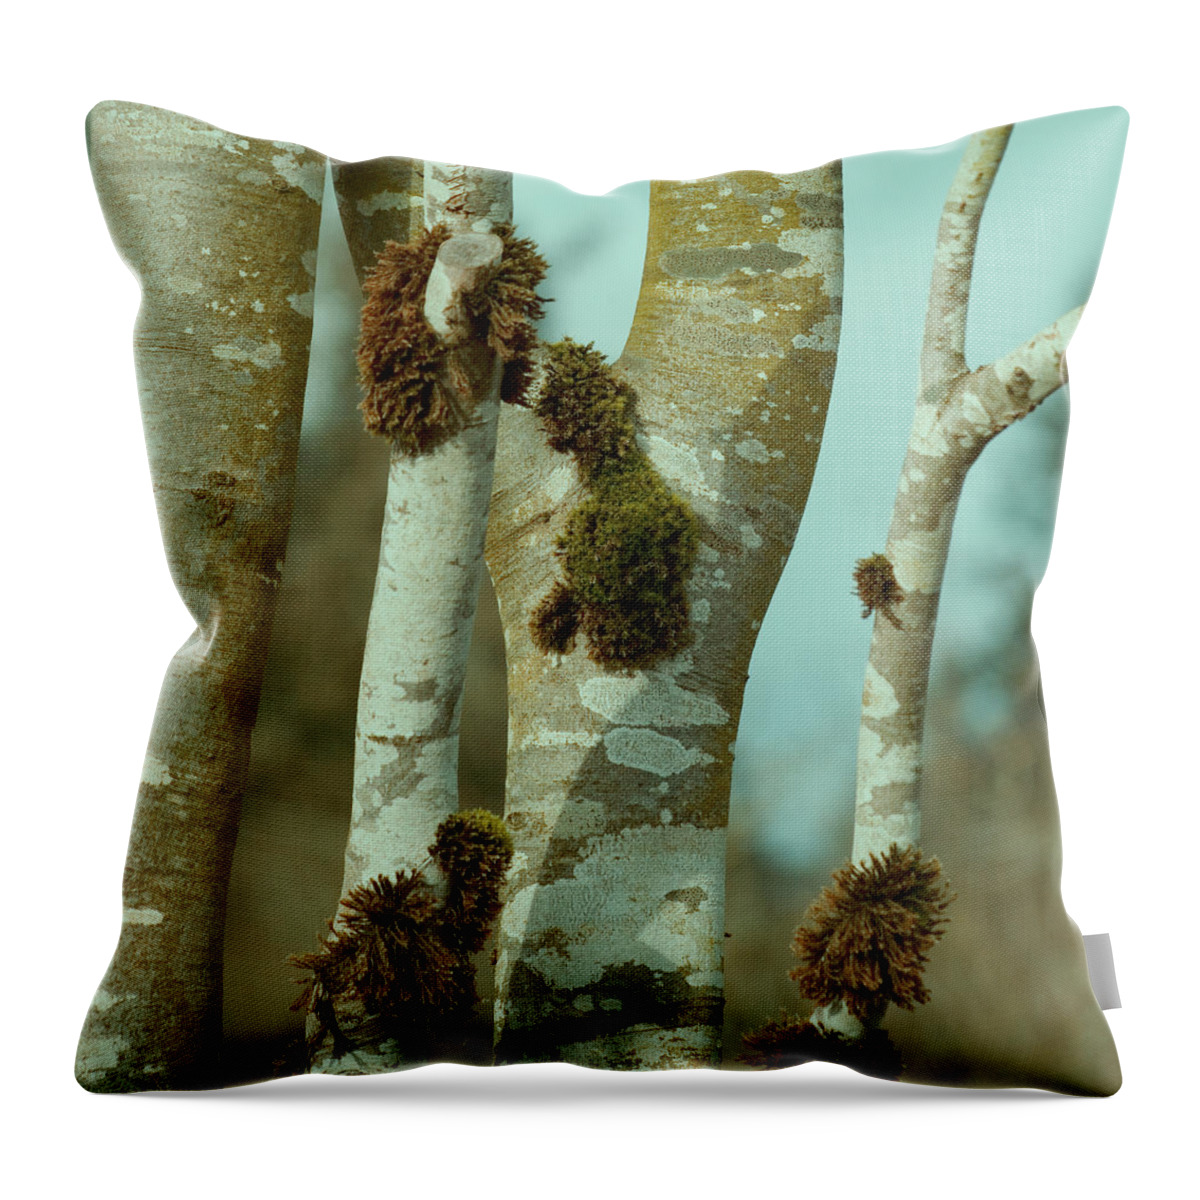 Birch Trees Throw Pillow featuring the photograph Birch by Bonnie Bruno